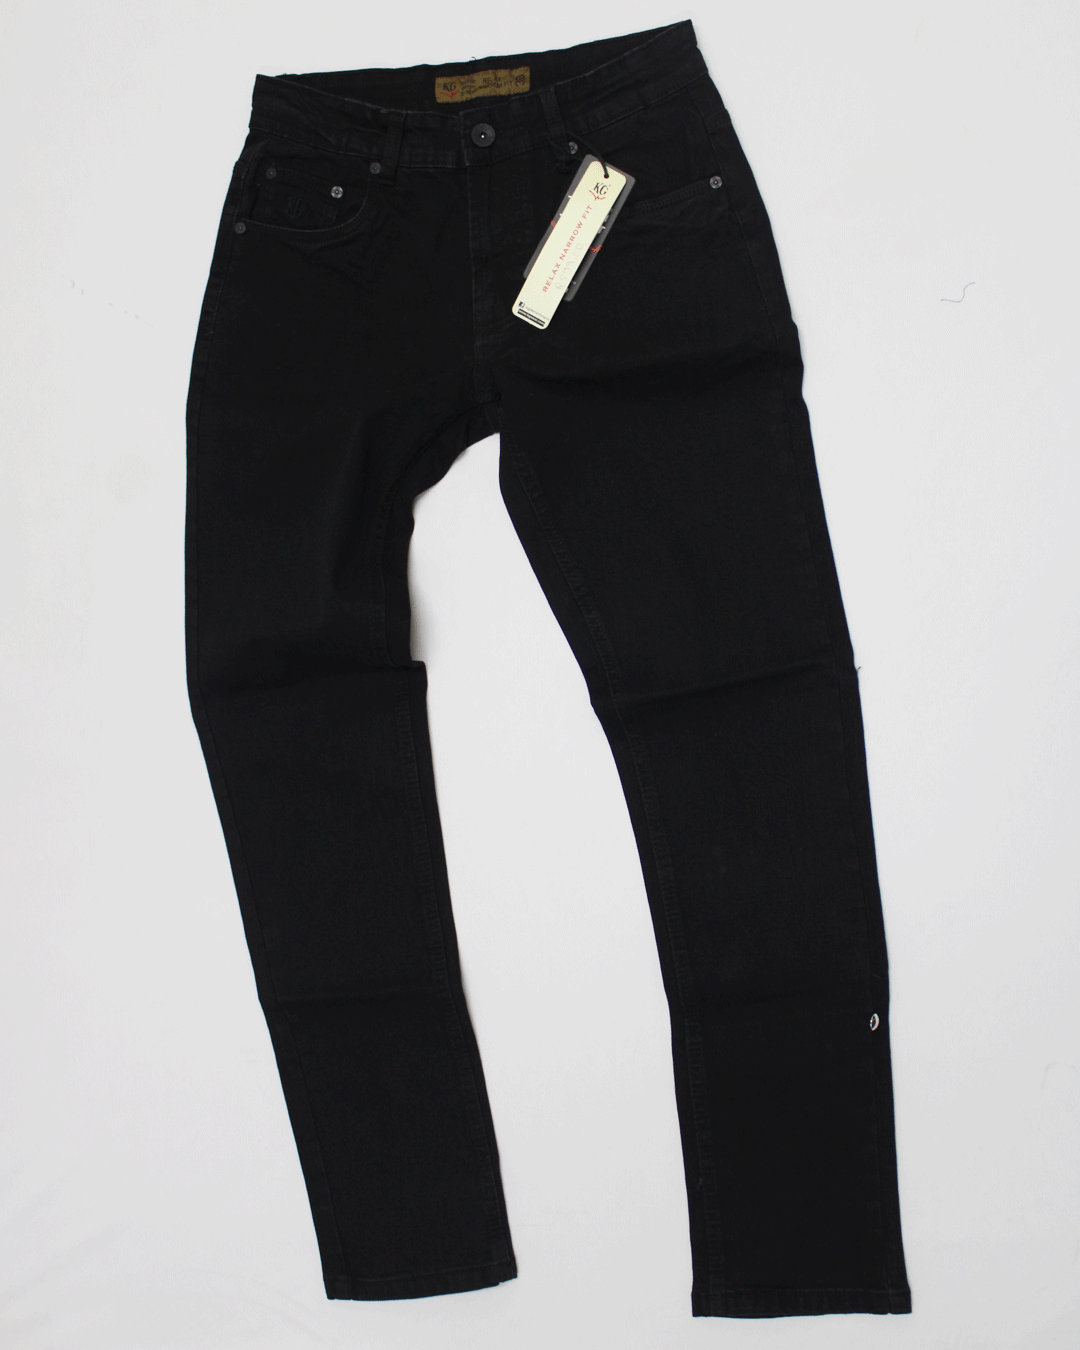 KG Black Relaxed Narrow Fit Jeans